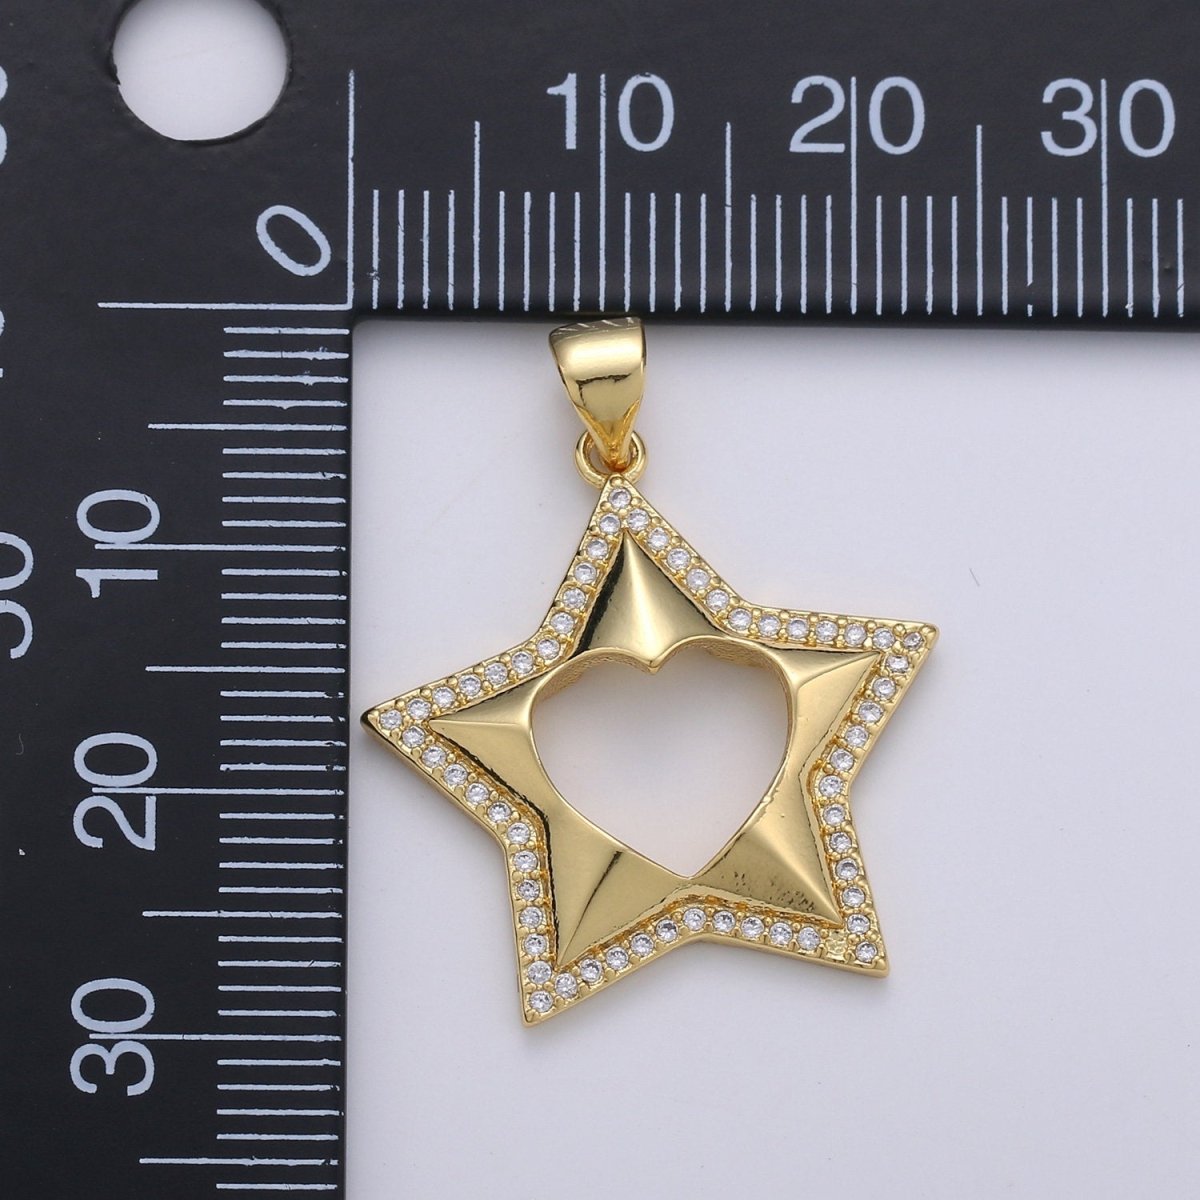 24k Gold Filled Micro Pave CZ Star Pendant Charm, Five Star Pendant Charm, Gold Filled Celestial Pendant, For DIY Jewelry Making I-727 - DLUXCA